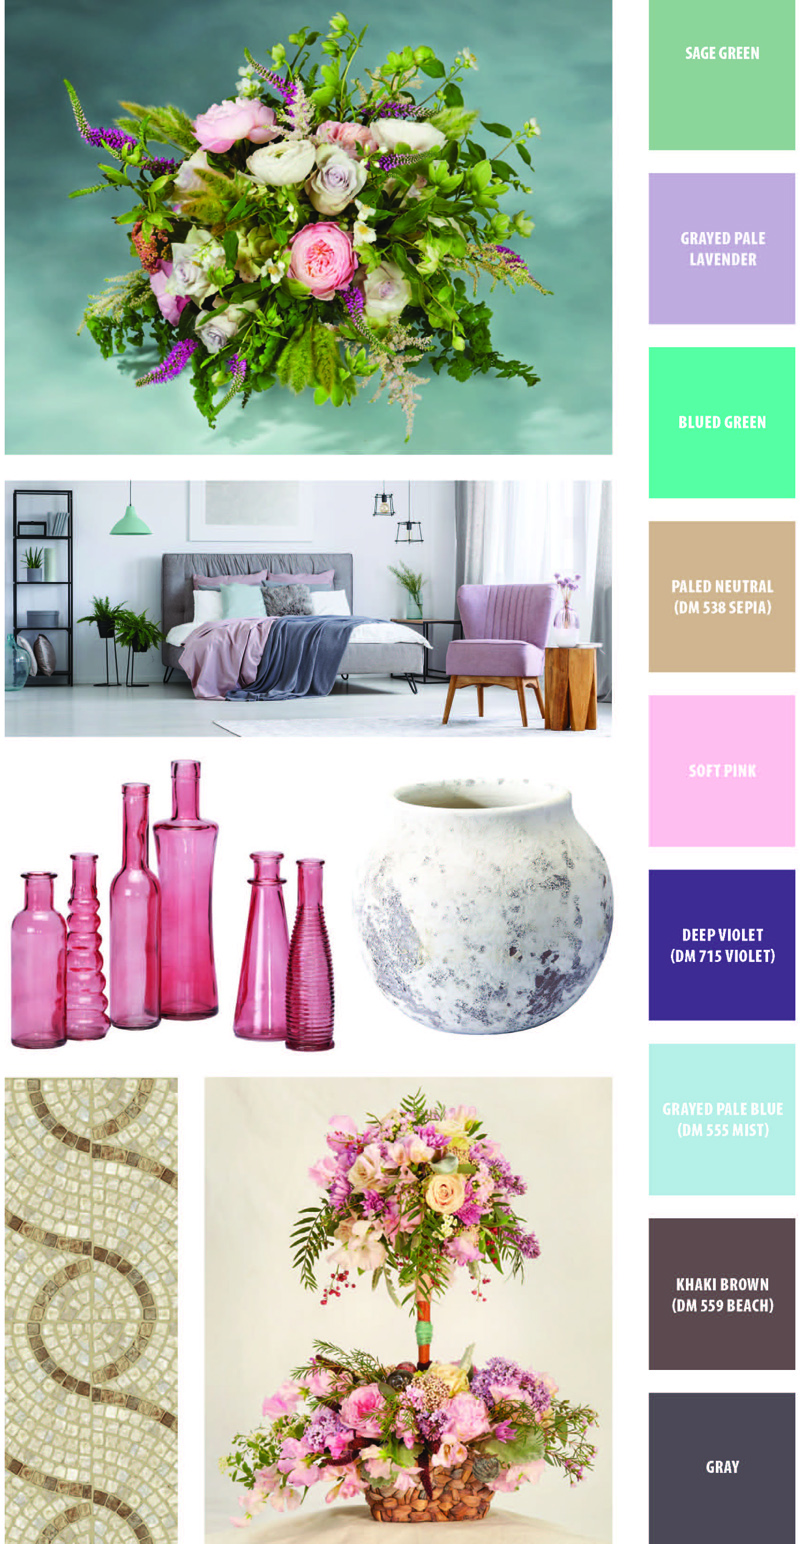 Ethereal Bliss: Containers Flowers and Colors, Sage Green, Grayed Pale Lavender, Blued Green, Paled Neutral DM538 Sepia, Soft Pink, Deep Violet DM715 Violet, Grayed Pale Blue DM555 Mist, Khaki Brown DM559 Beach, Gray